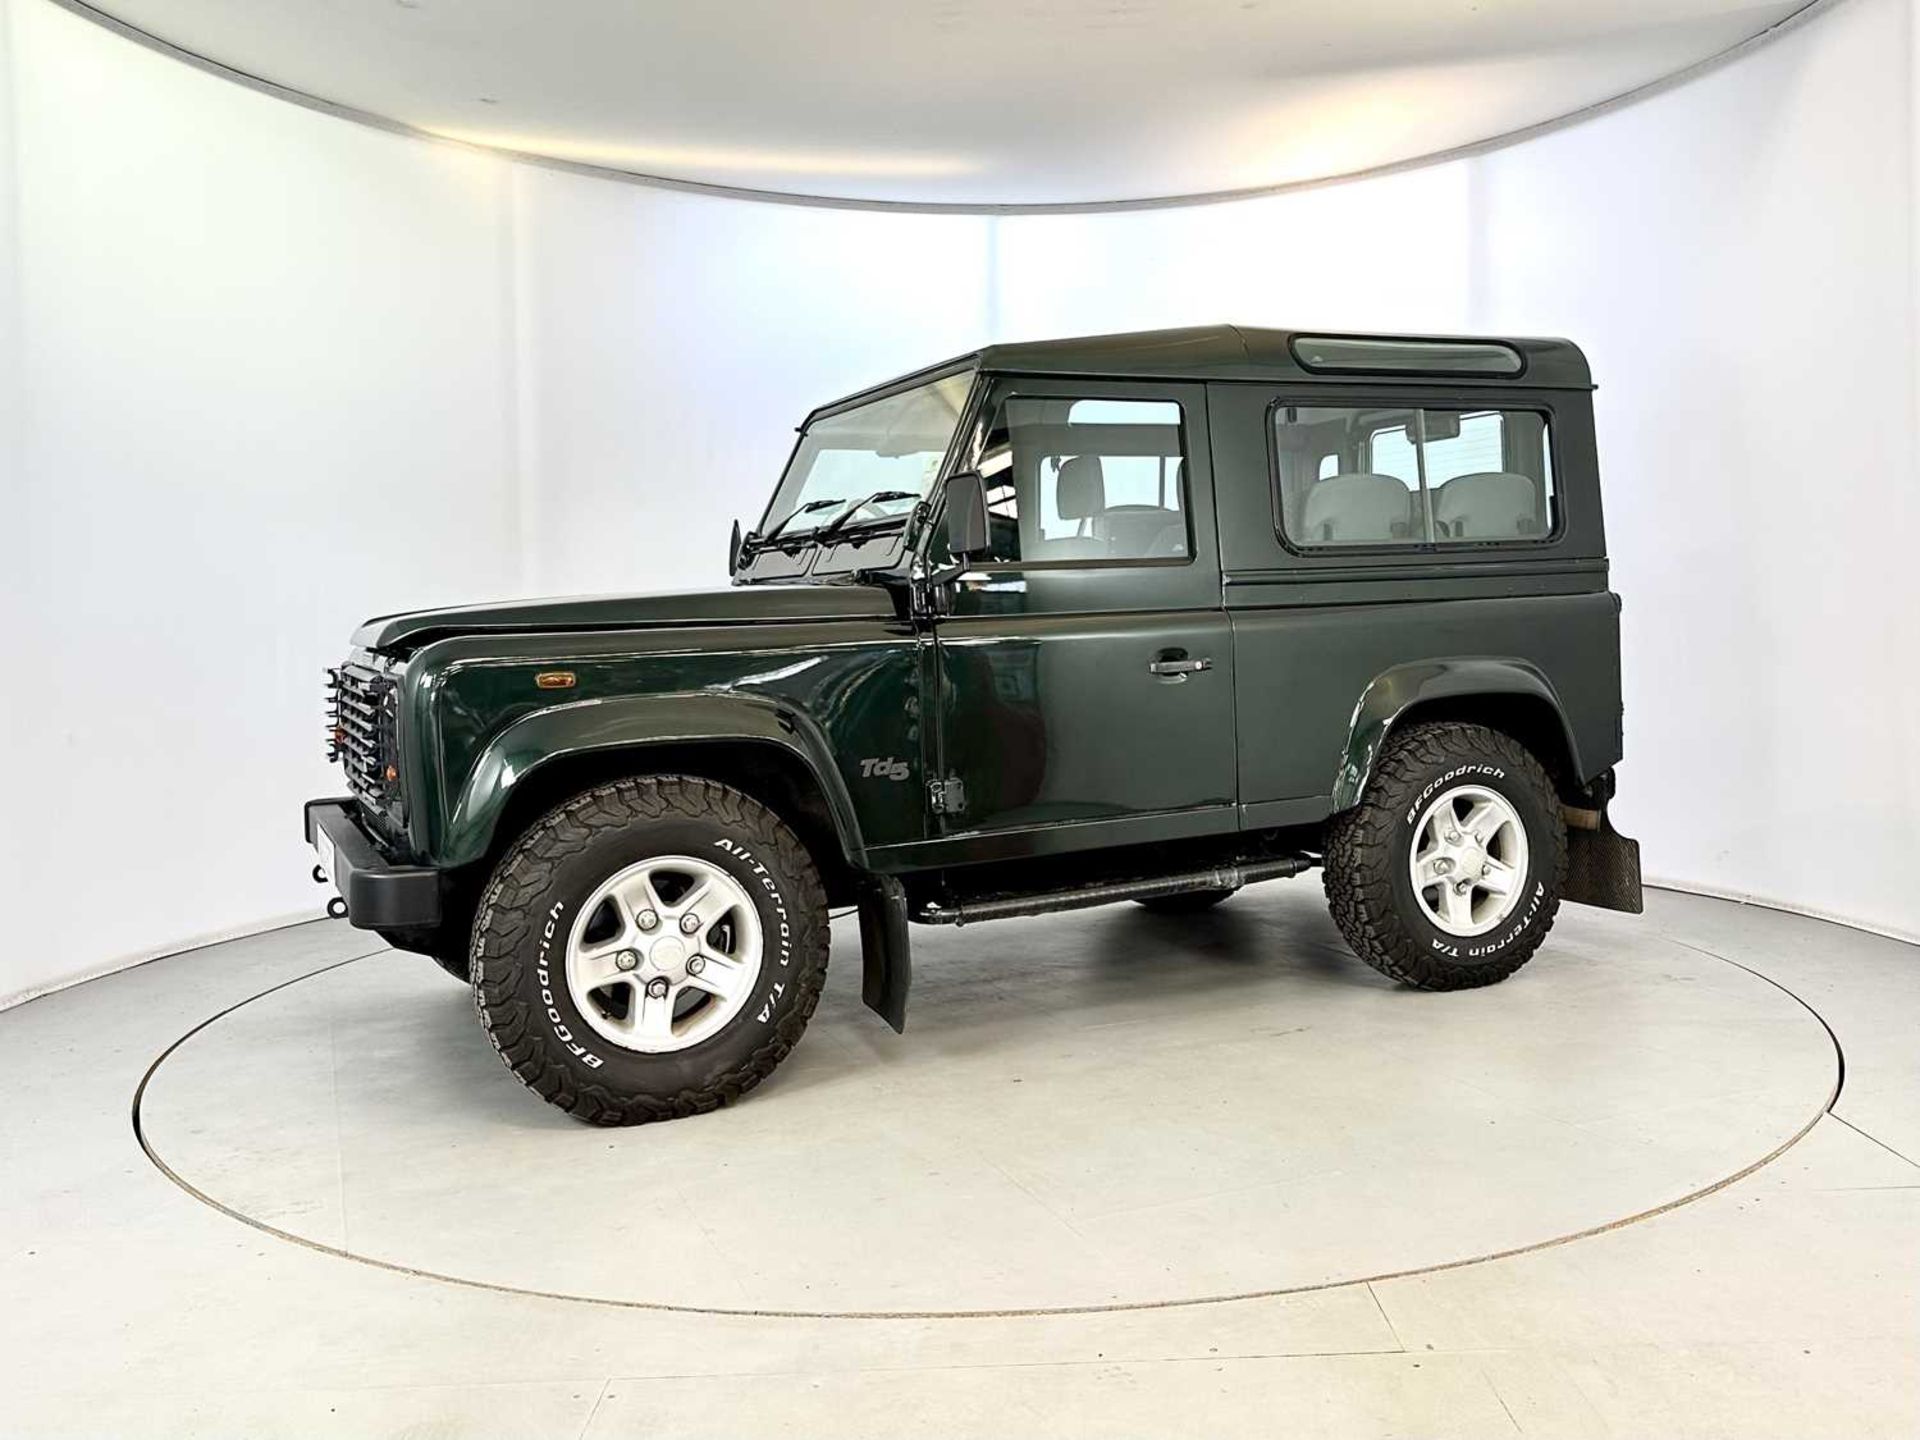 2002 Land Rover Defender 90 TD5 County - Image 4 of 28